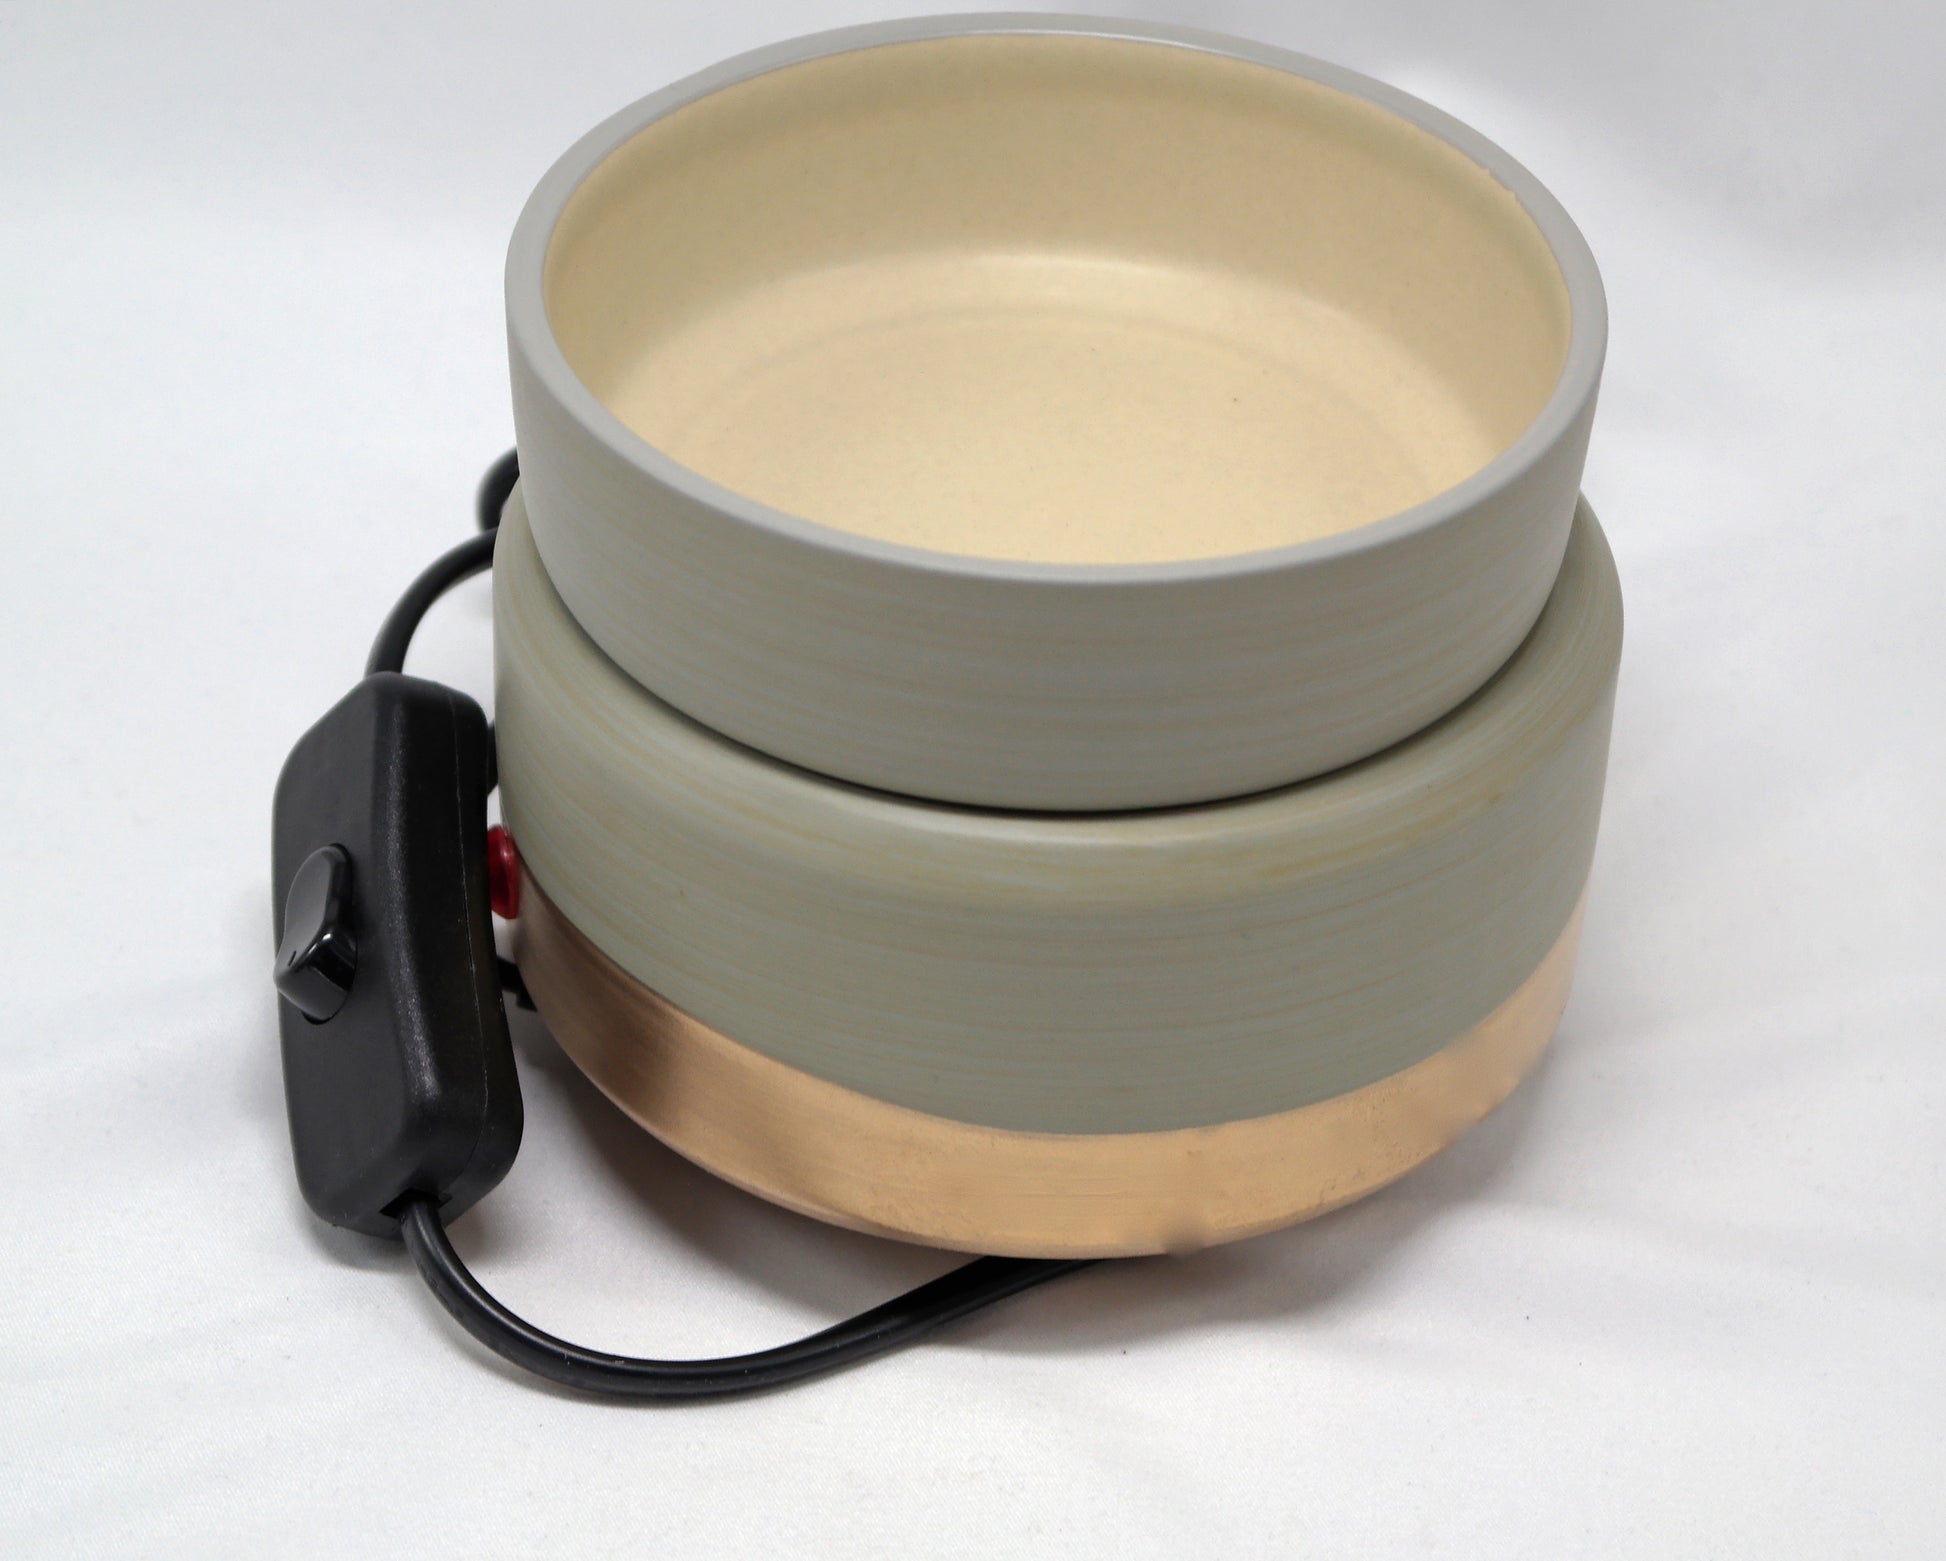 Rose Gold & Grey Ceramic Electric Wax Melter & Warmer